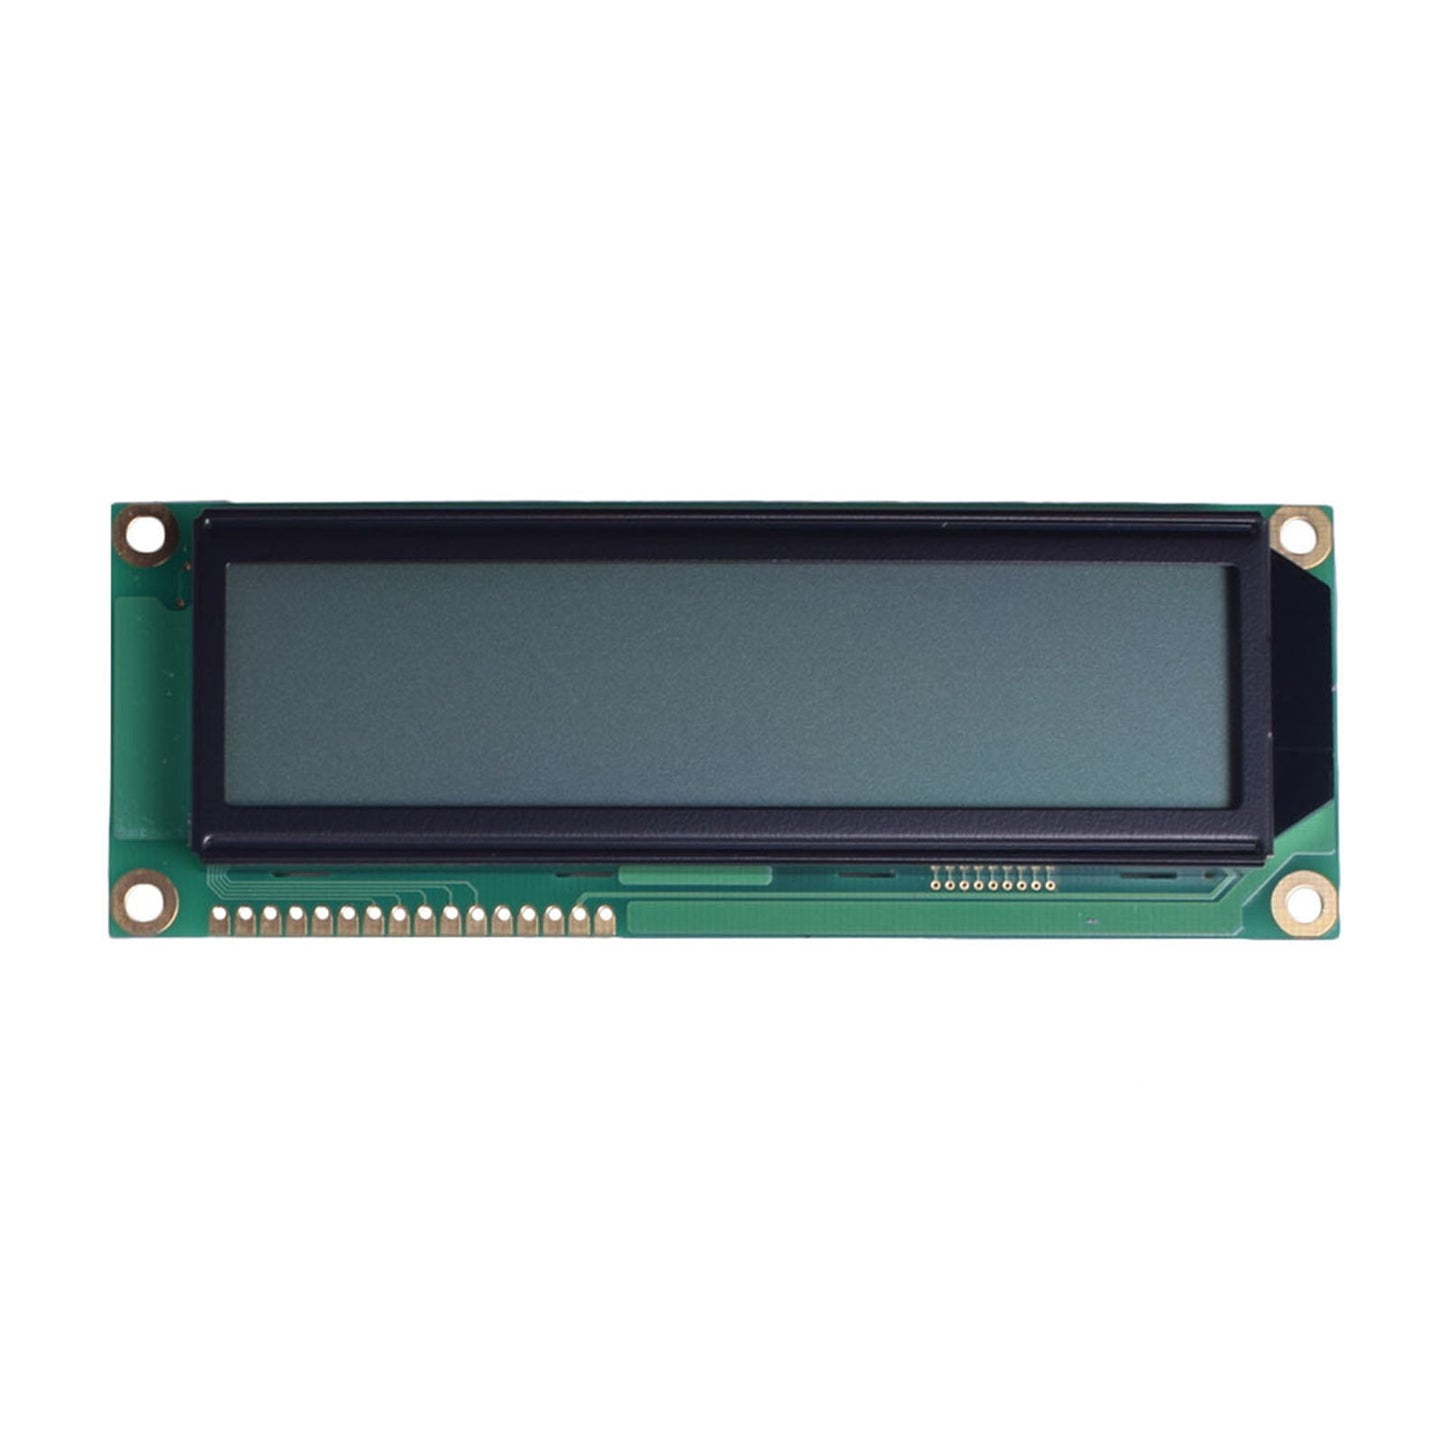 Large size 16x2 character LCD with FSTN transflective technology and MCU interface